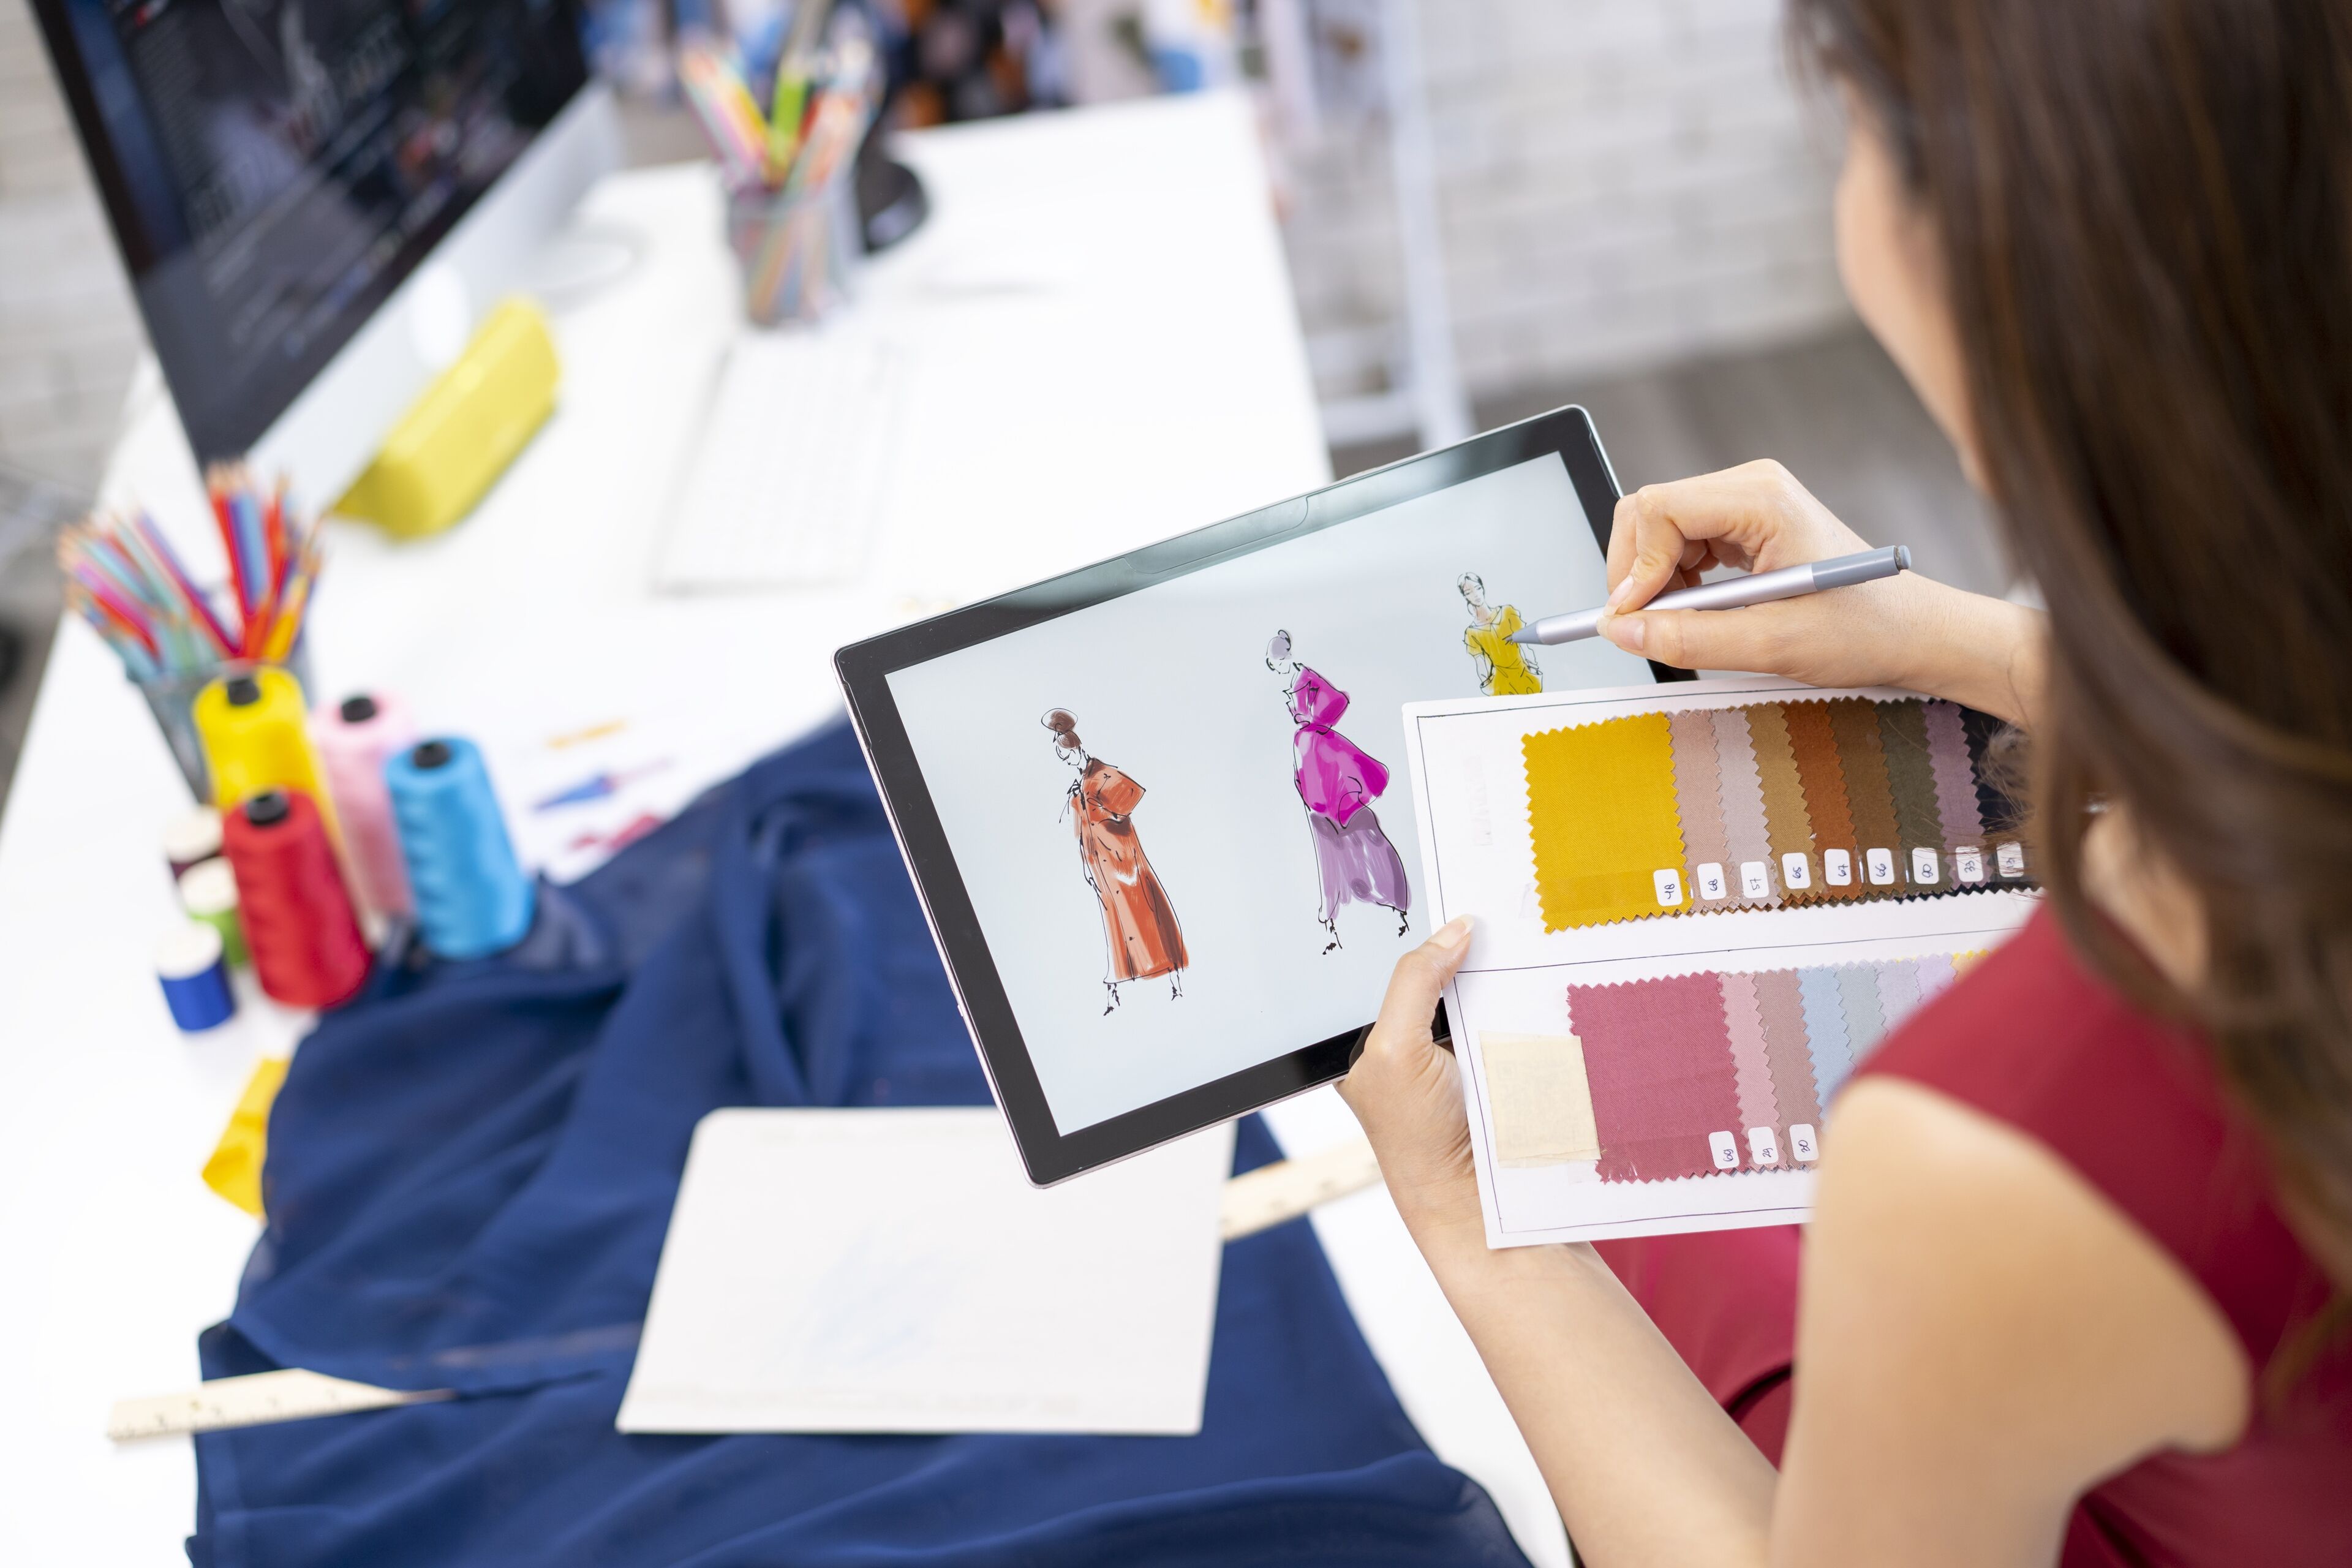 A designer examines digital garment sketches on a tablet, referencing a physical fabric swatch palette, in a creative workspace.